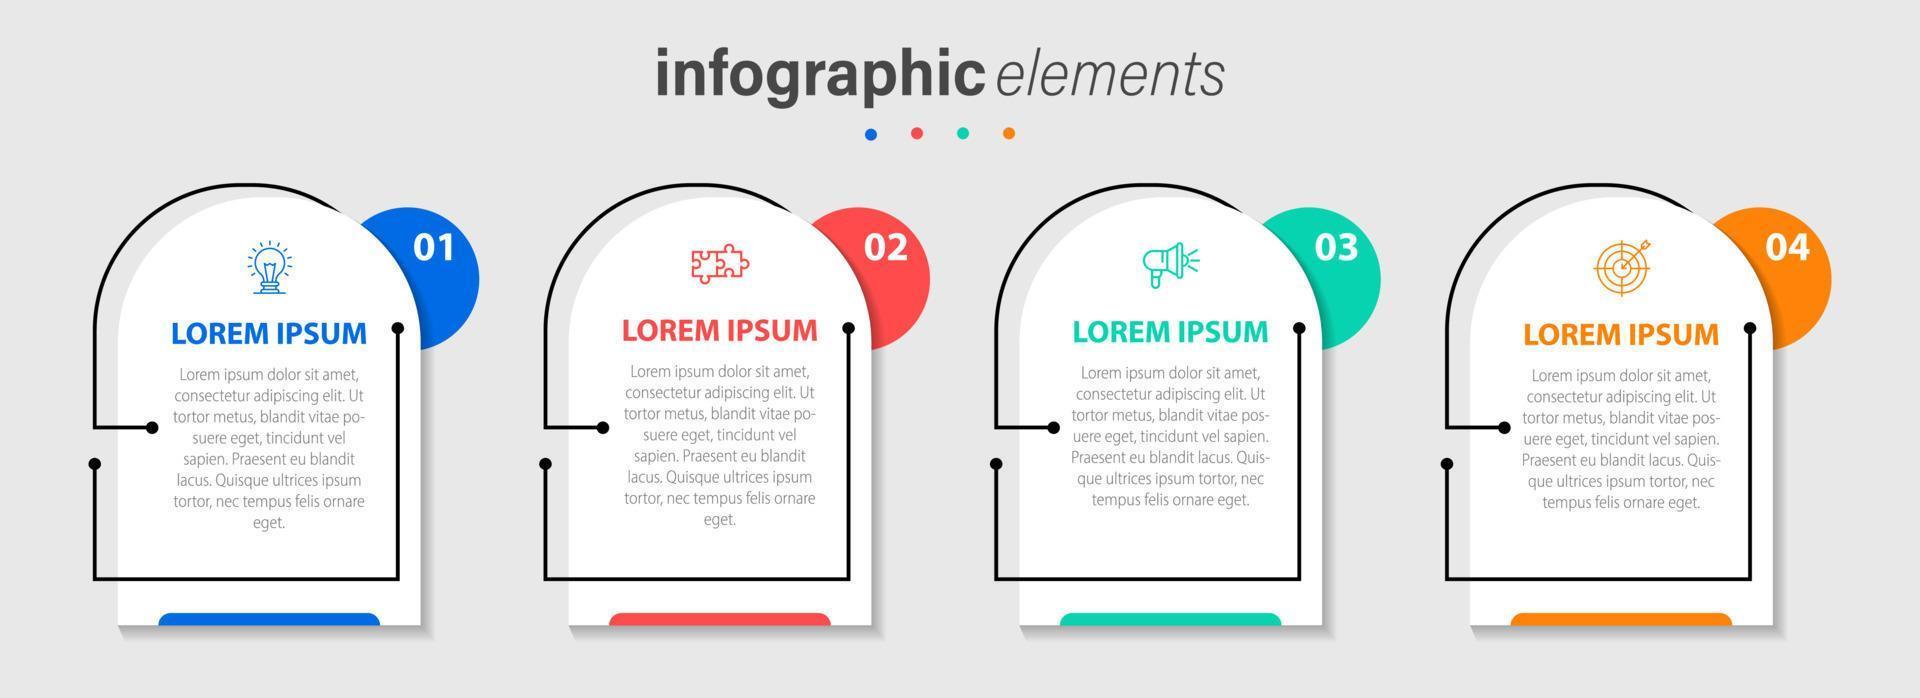 Business infographic elements template design with icons and 4 options or steps. Vector illustration.